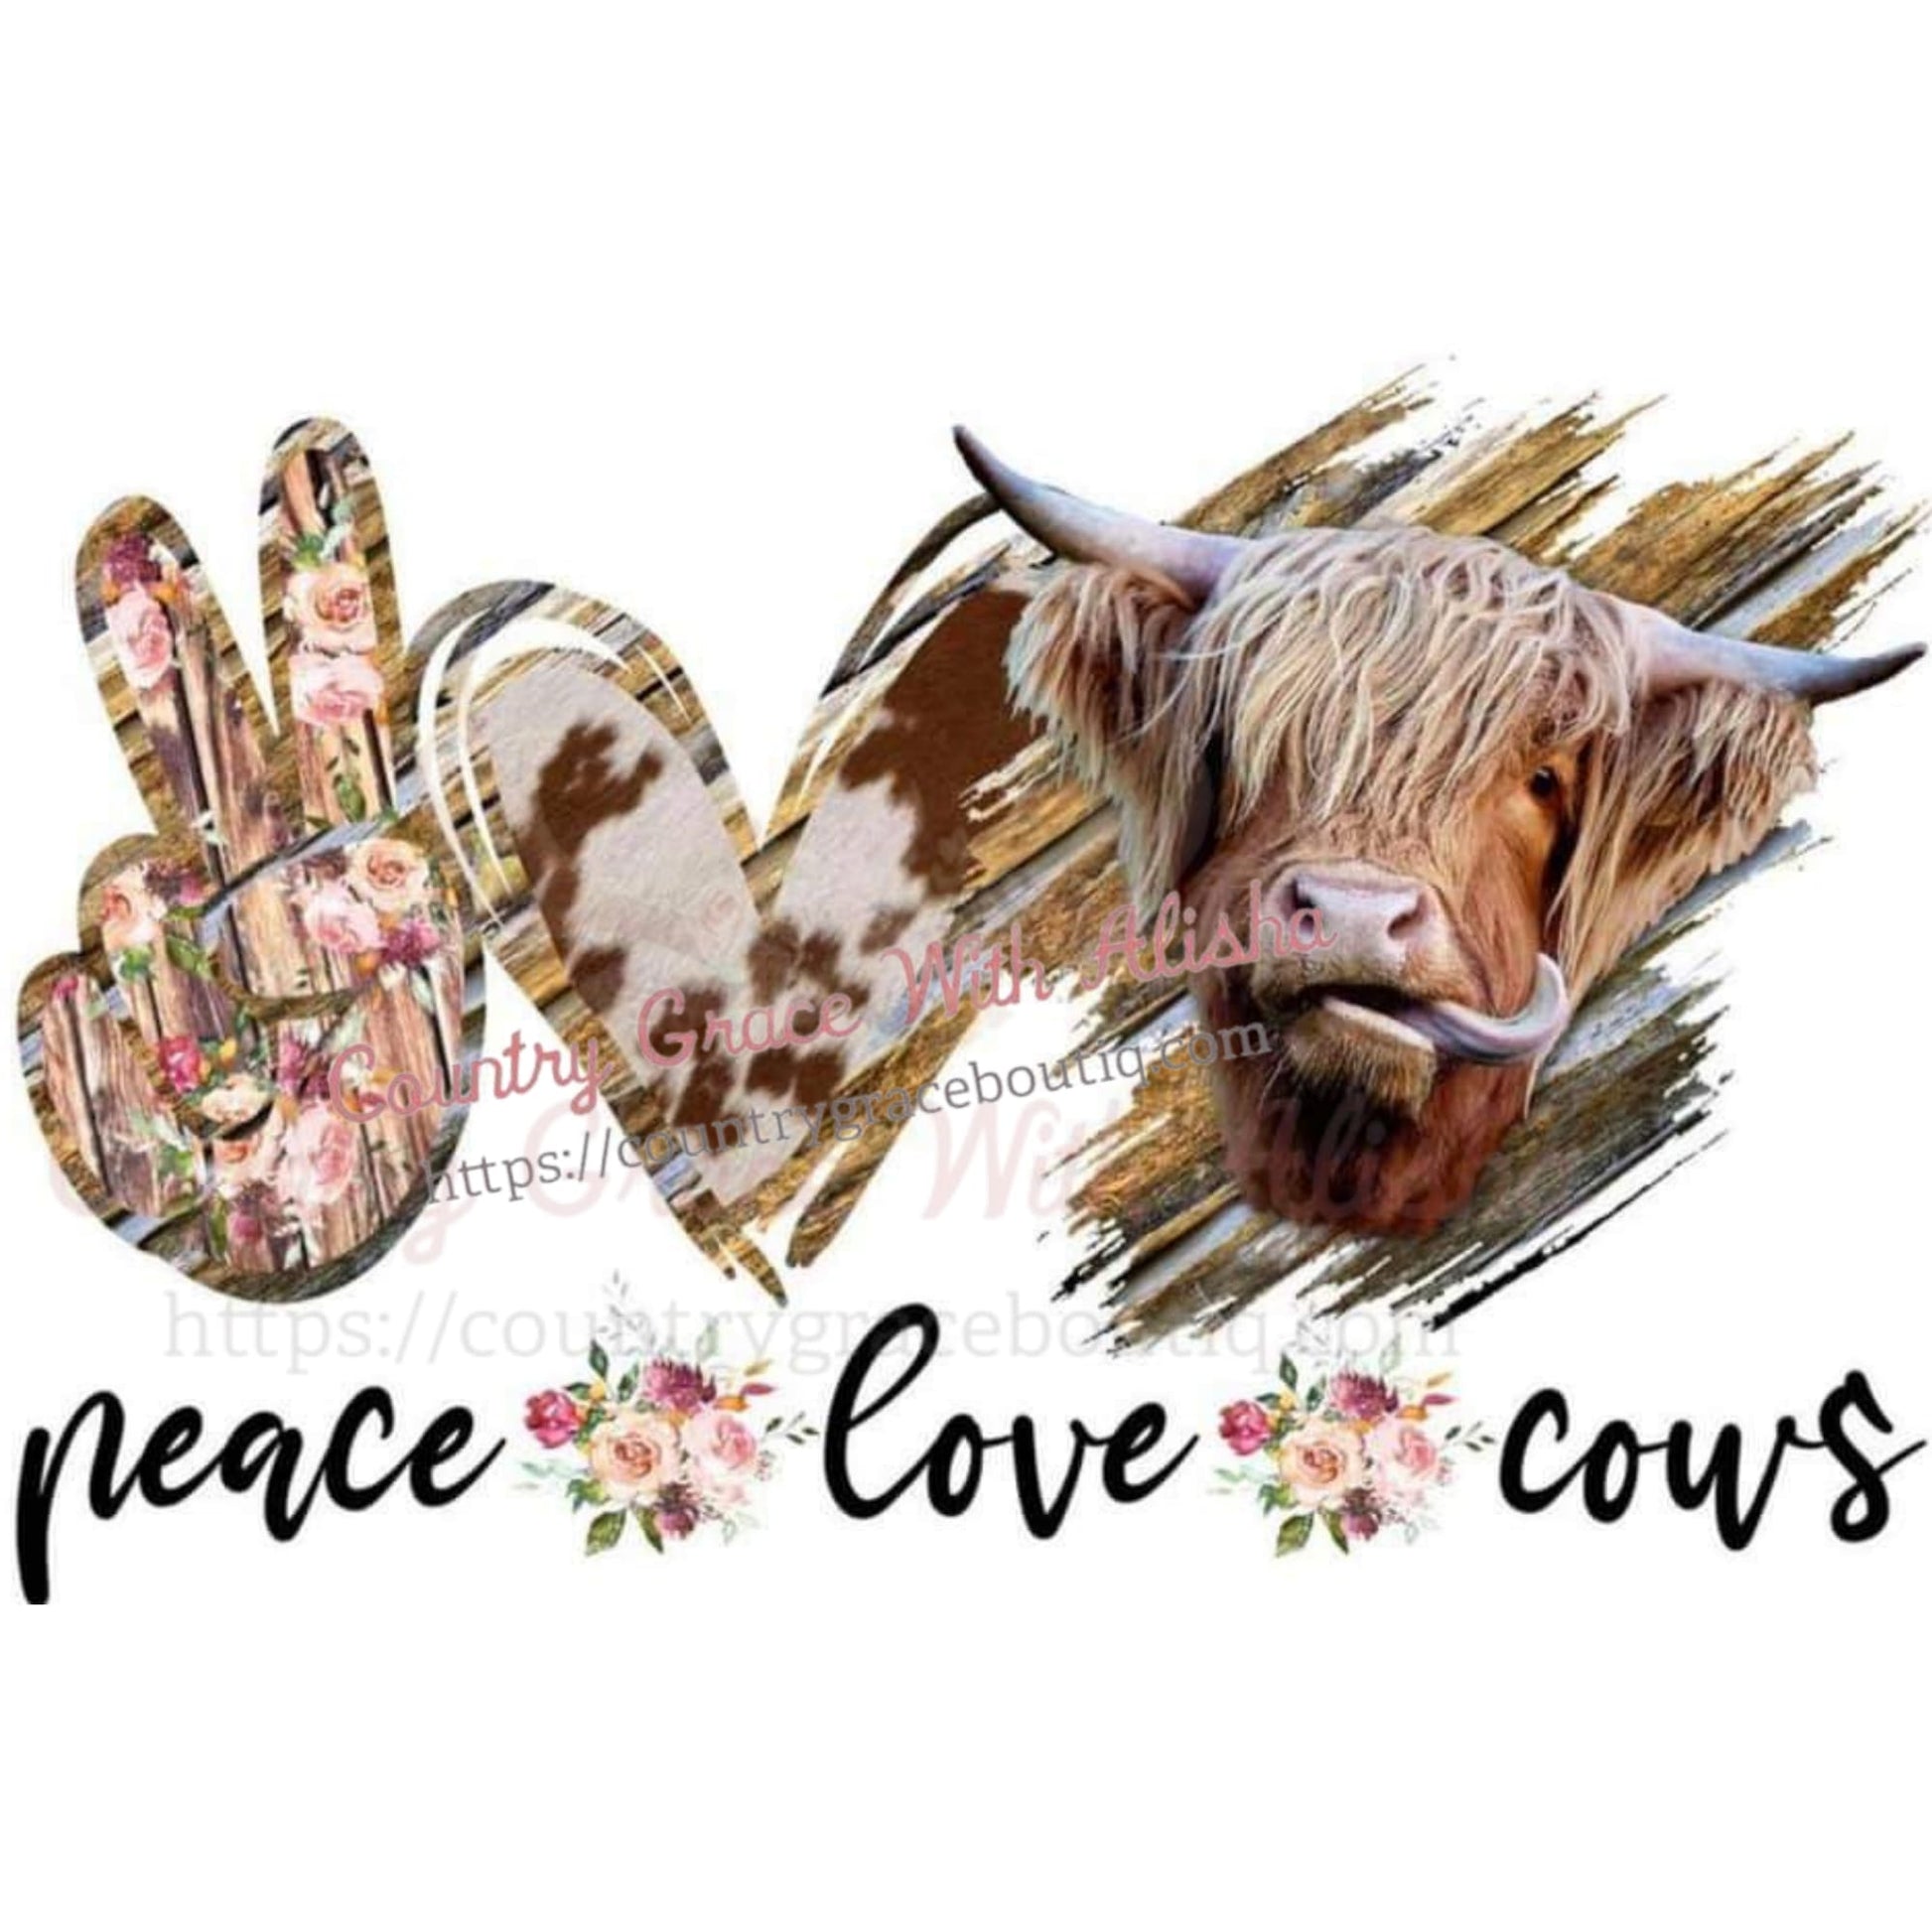 Peace Love Cows Sublimation Transfer - Sub $1.50 Country 